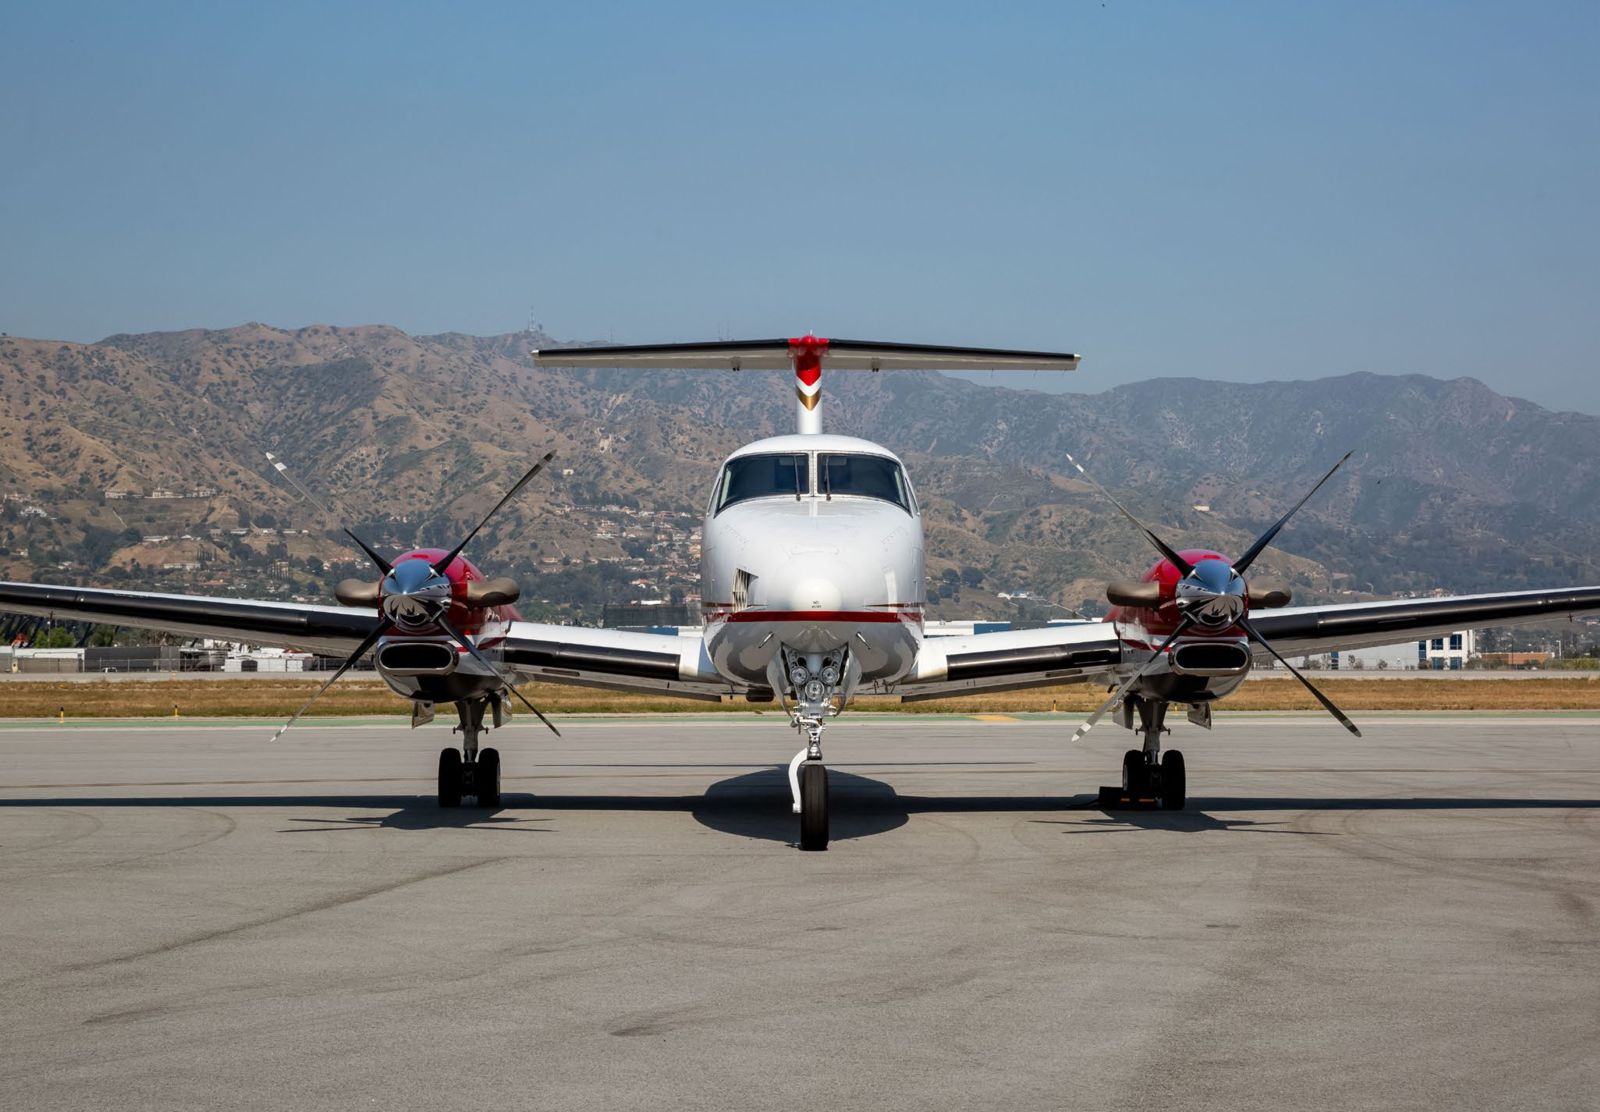 Beech King Air 350i  S/N FL-811 for sale | gallery image: /userfiles/files/specs/GV/350%20pic9.jpg